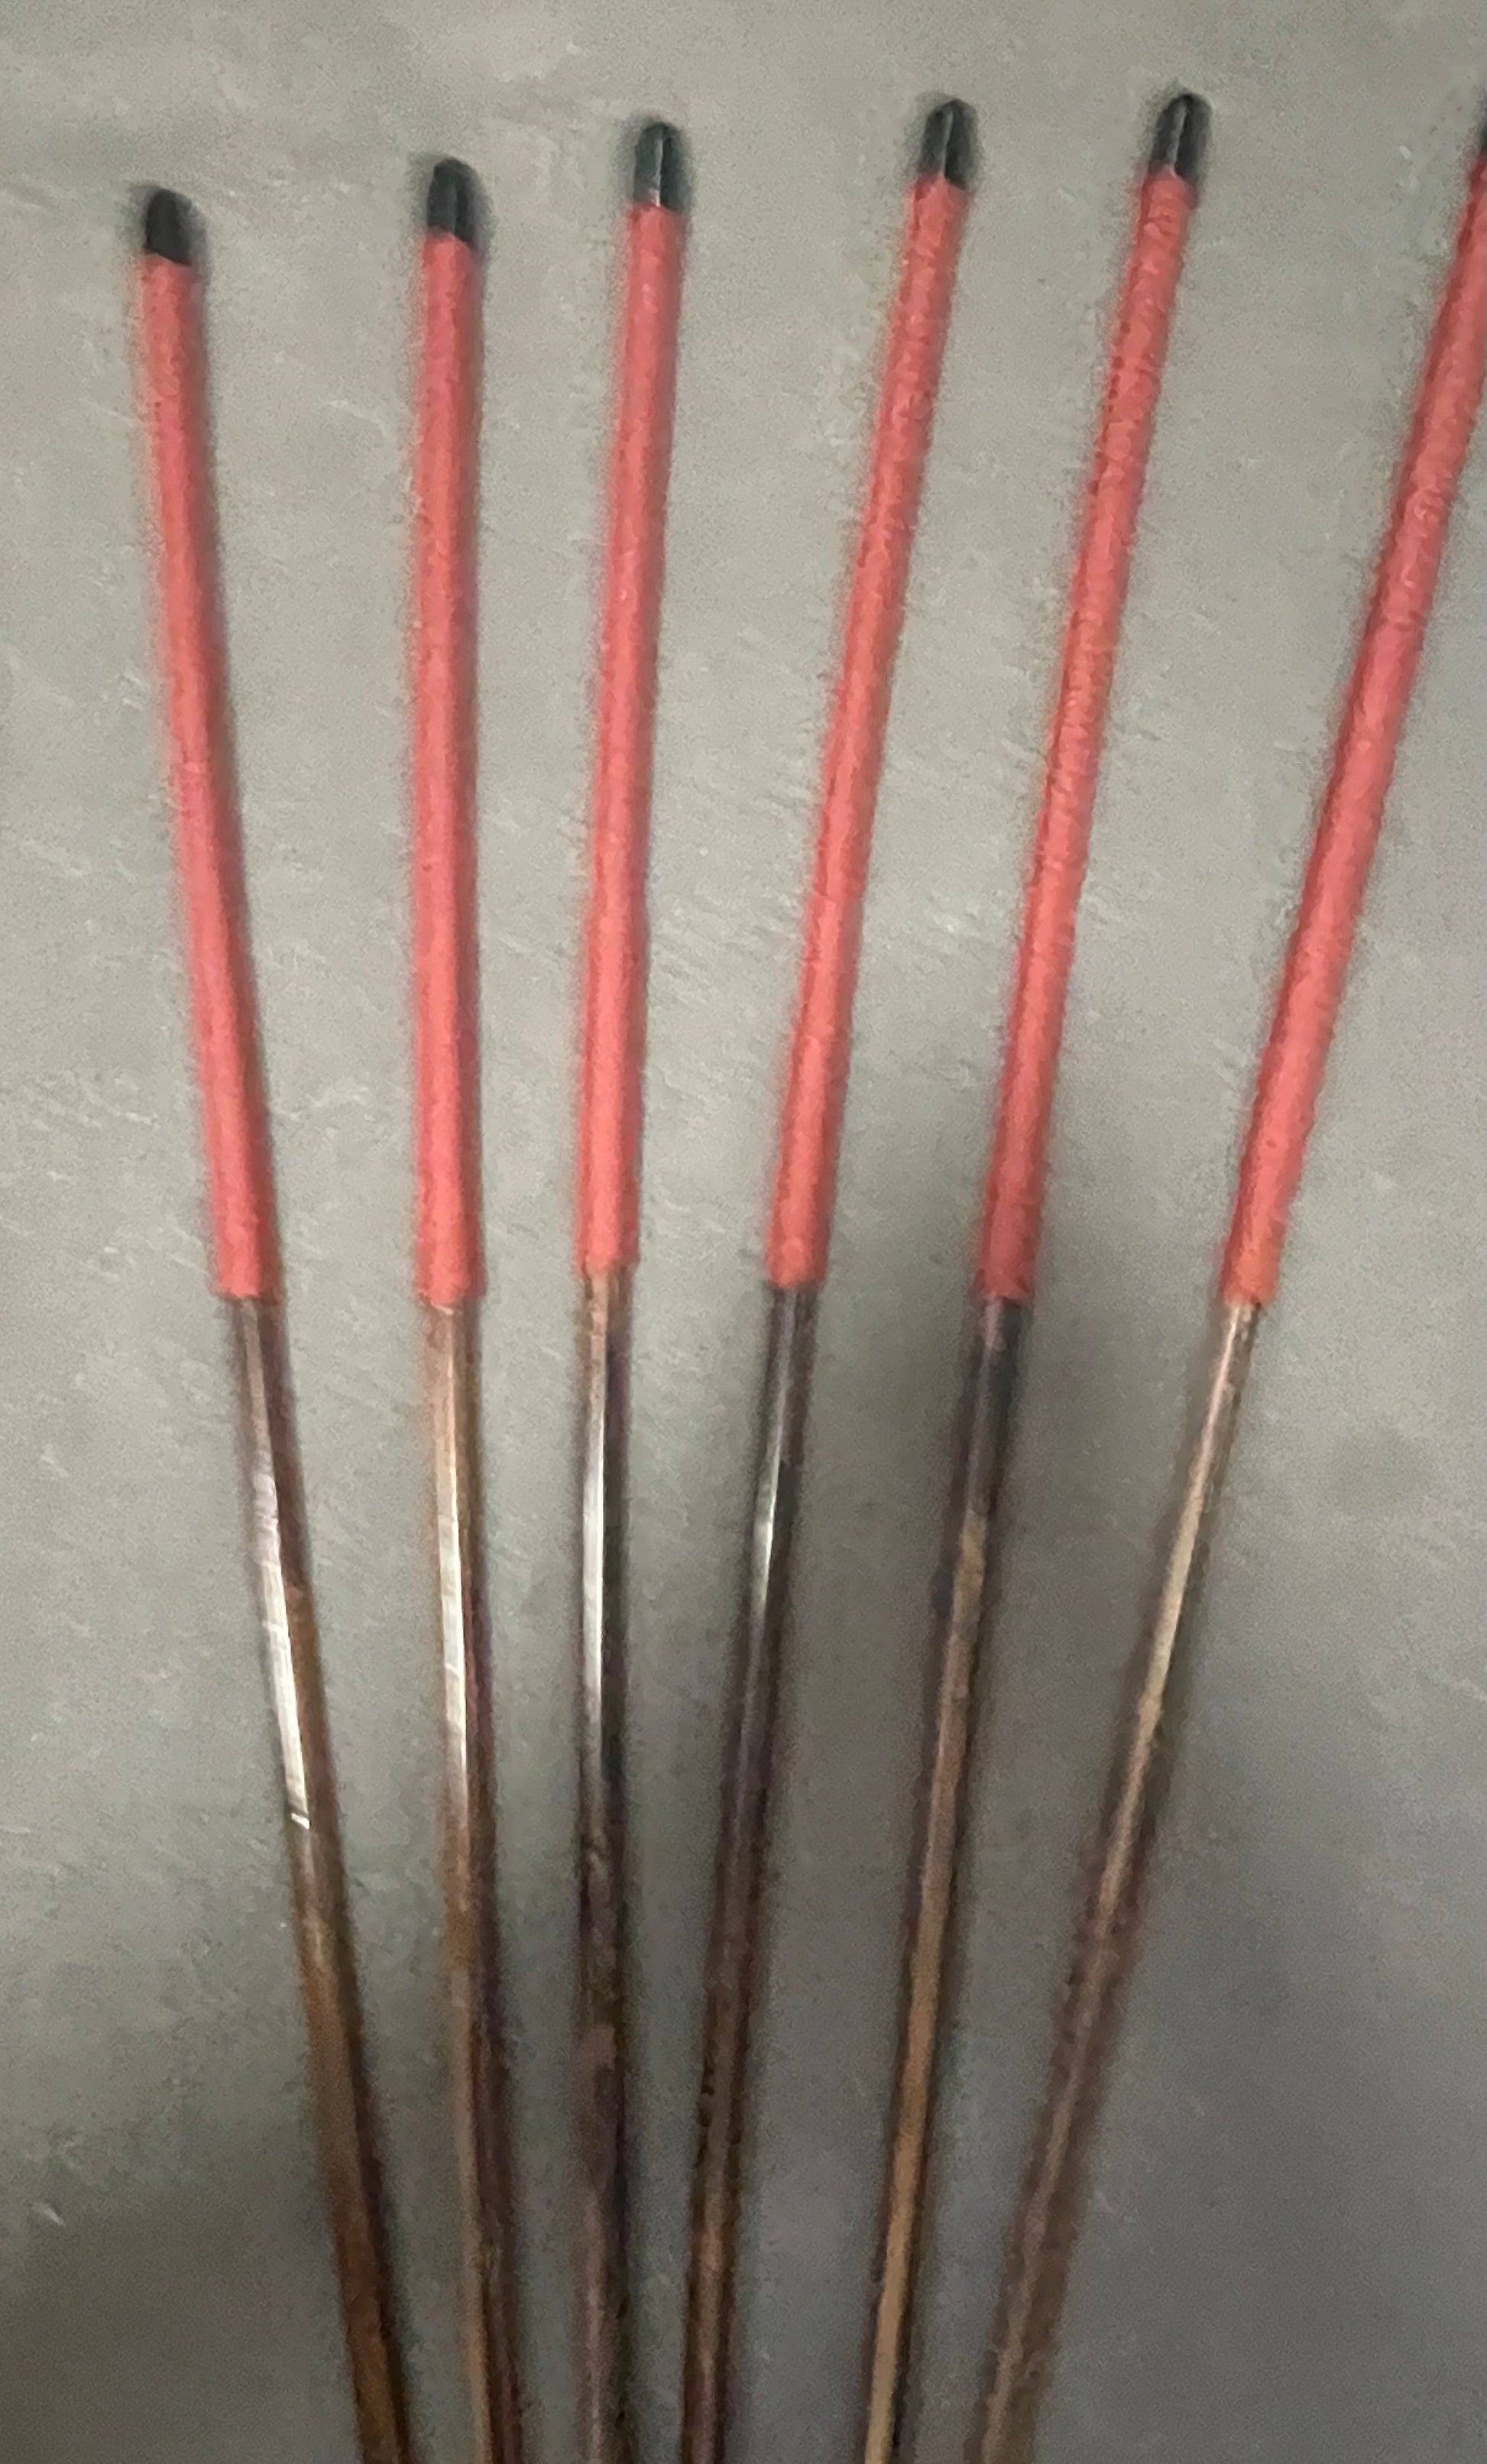 Set of 6 Knotless / No Knot Smoked Dragon Canes with Brick Red Handles - Englishvice Canes